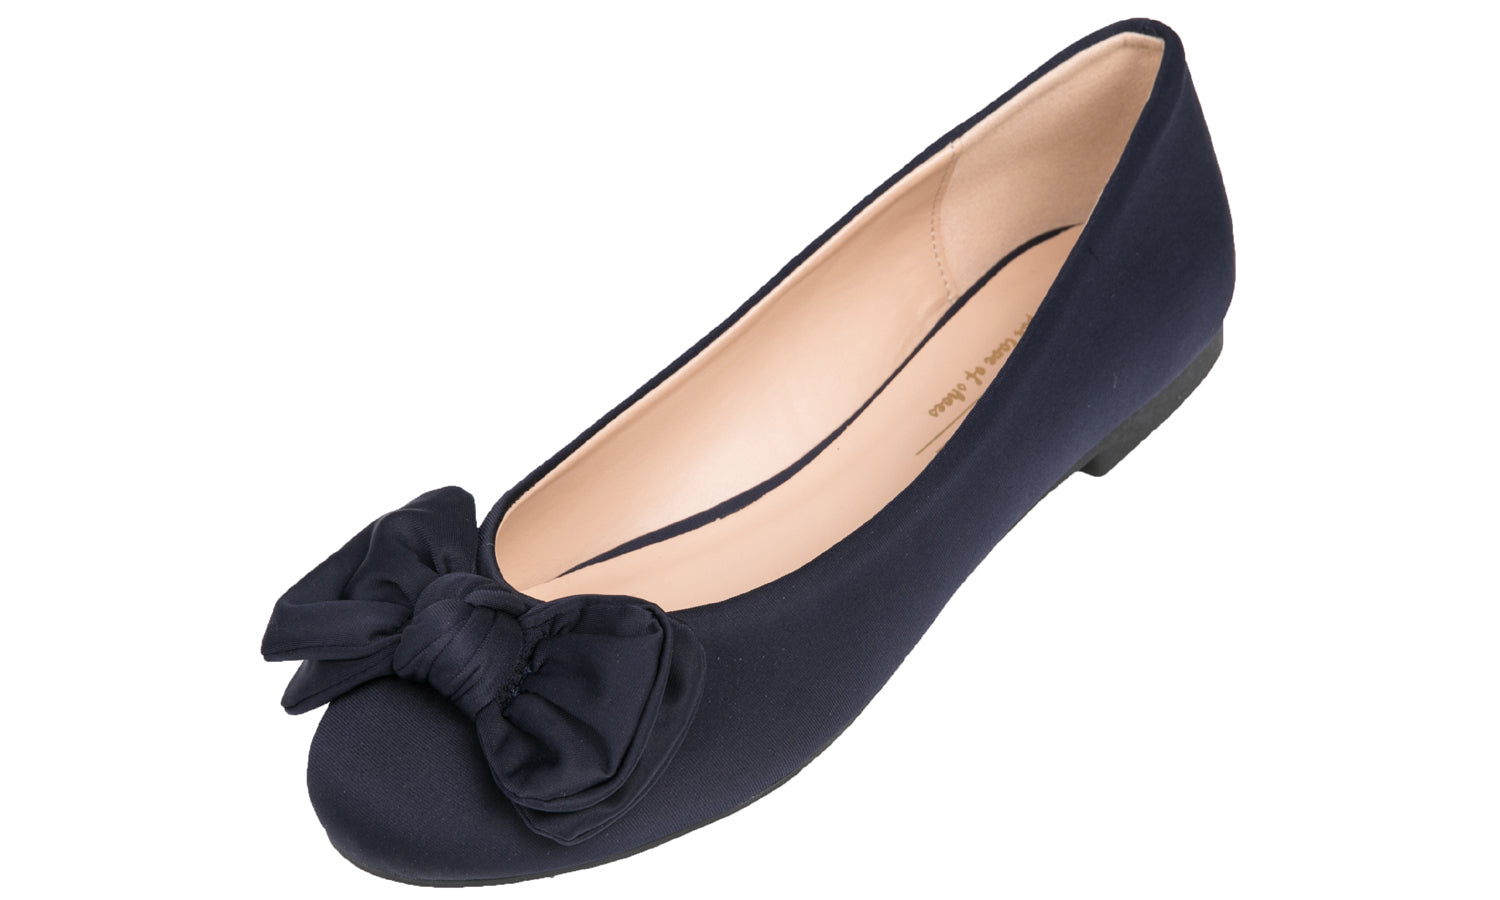 Feversole Women's Round Toe Cute Bow Trim Ballet Flats In Navy Color